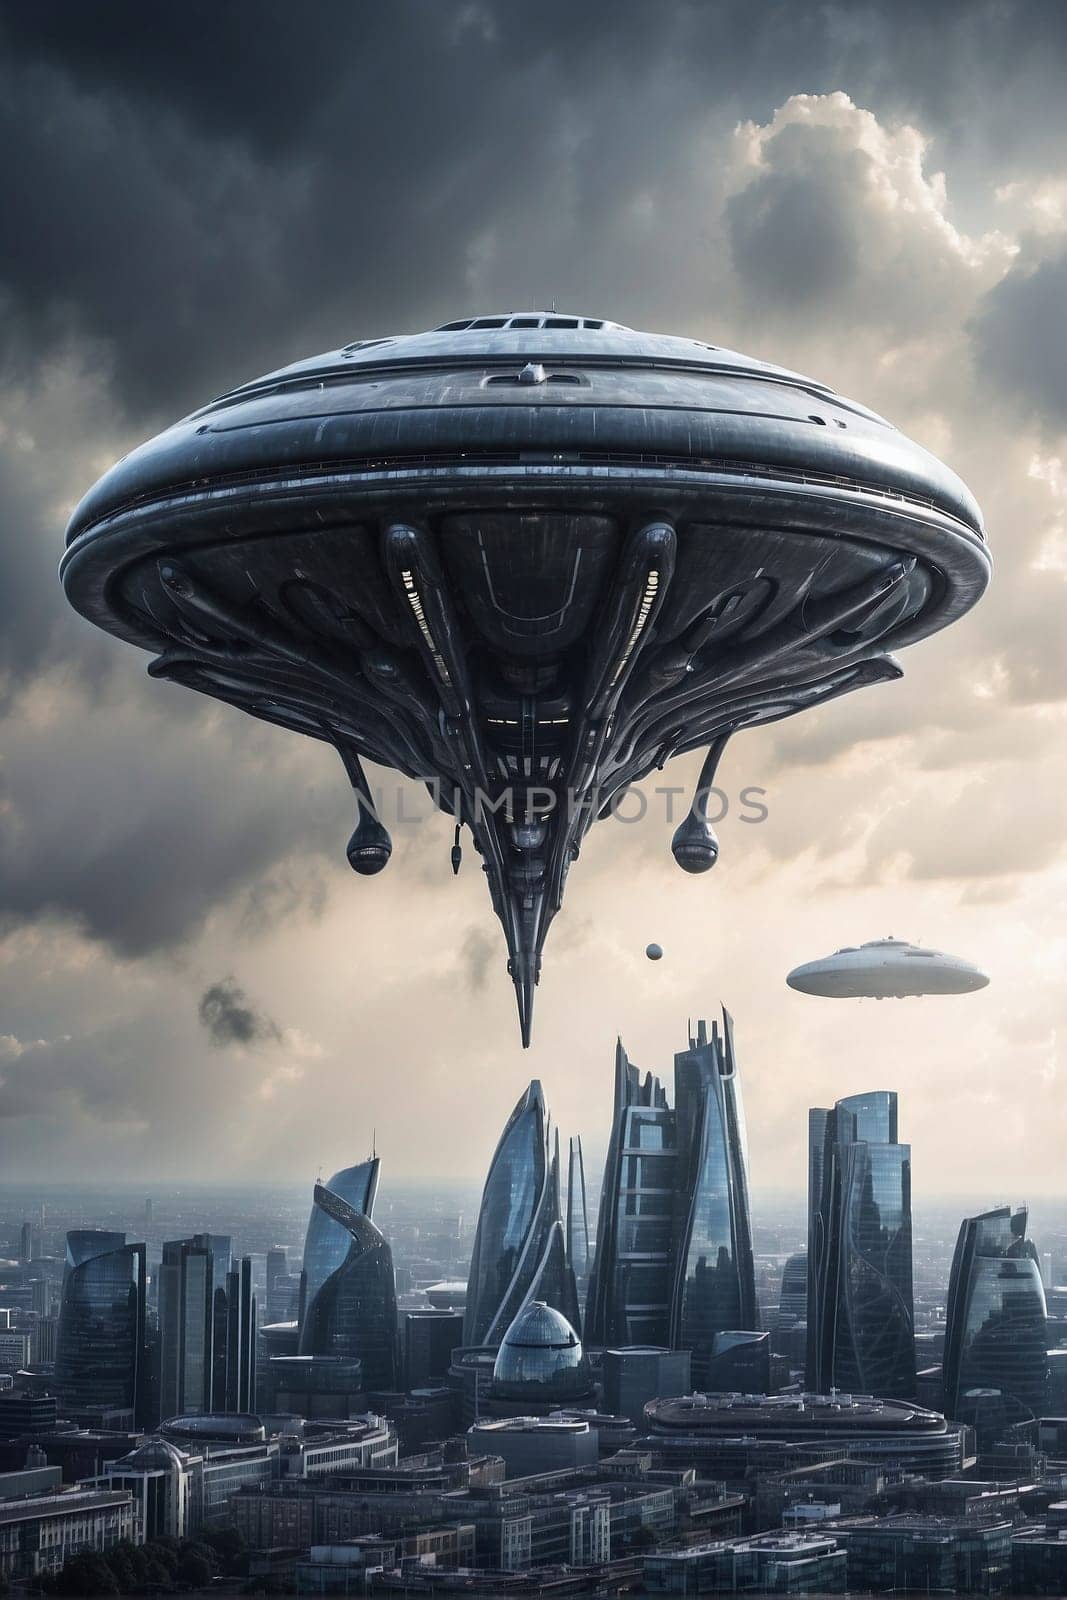 A photograph of a modern, technologically advanced cityscape with a flying saucer hovering in the sky.